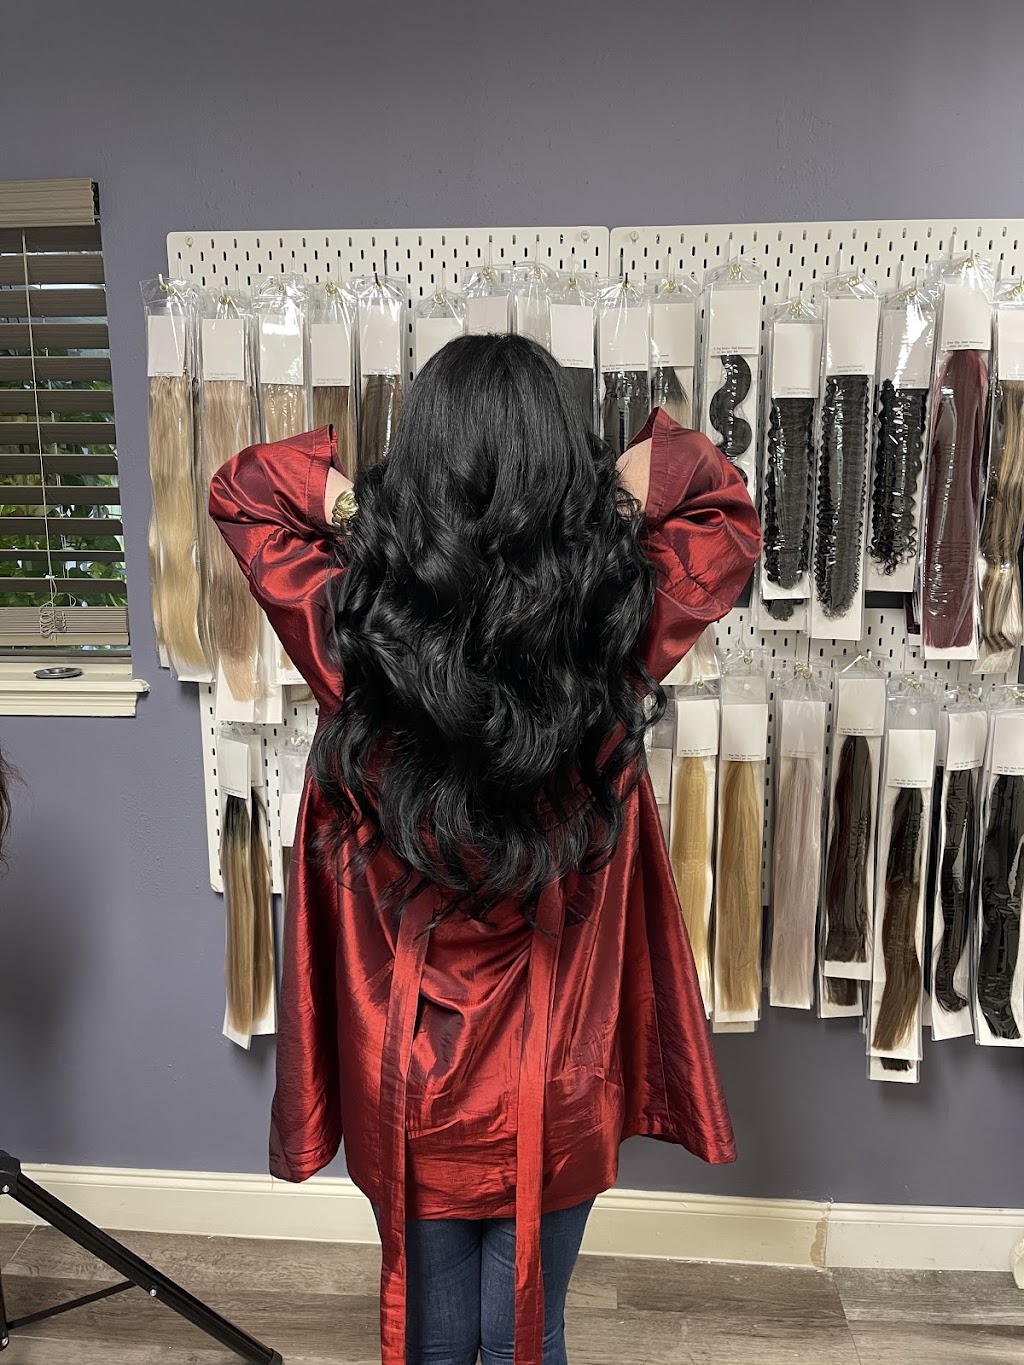 Love is in the hair Extensions | 11500 Northwest Fwy 6 floor Suite 600, Houston, TX 77092 | Phone: (832) 779-1806